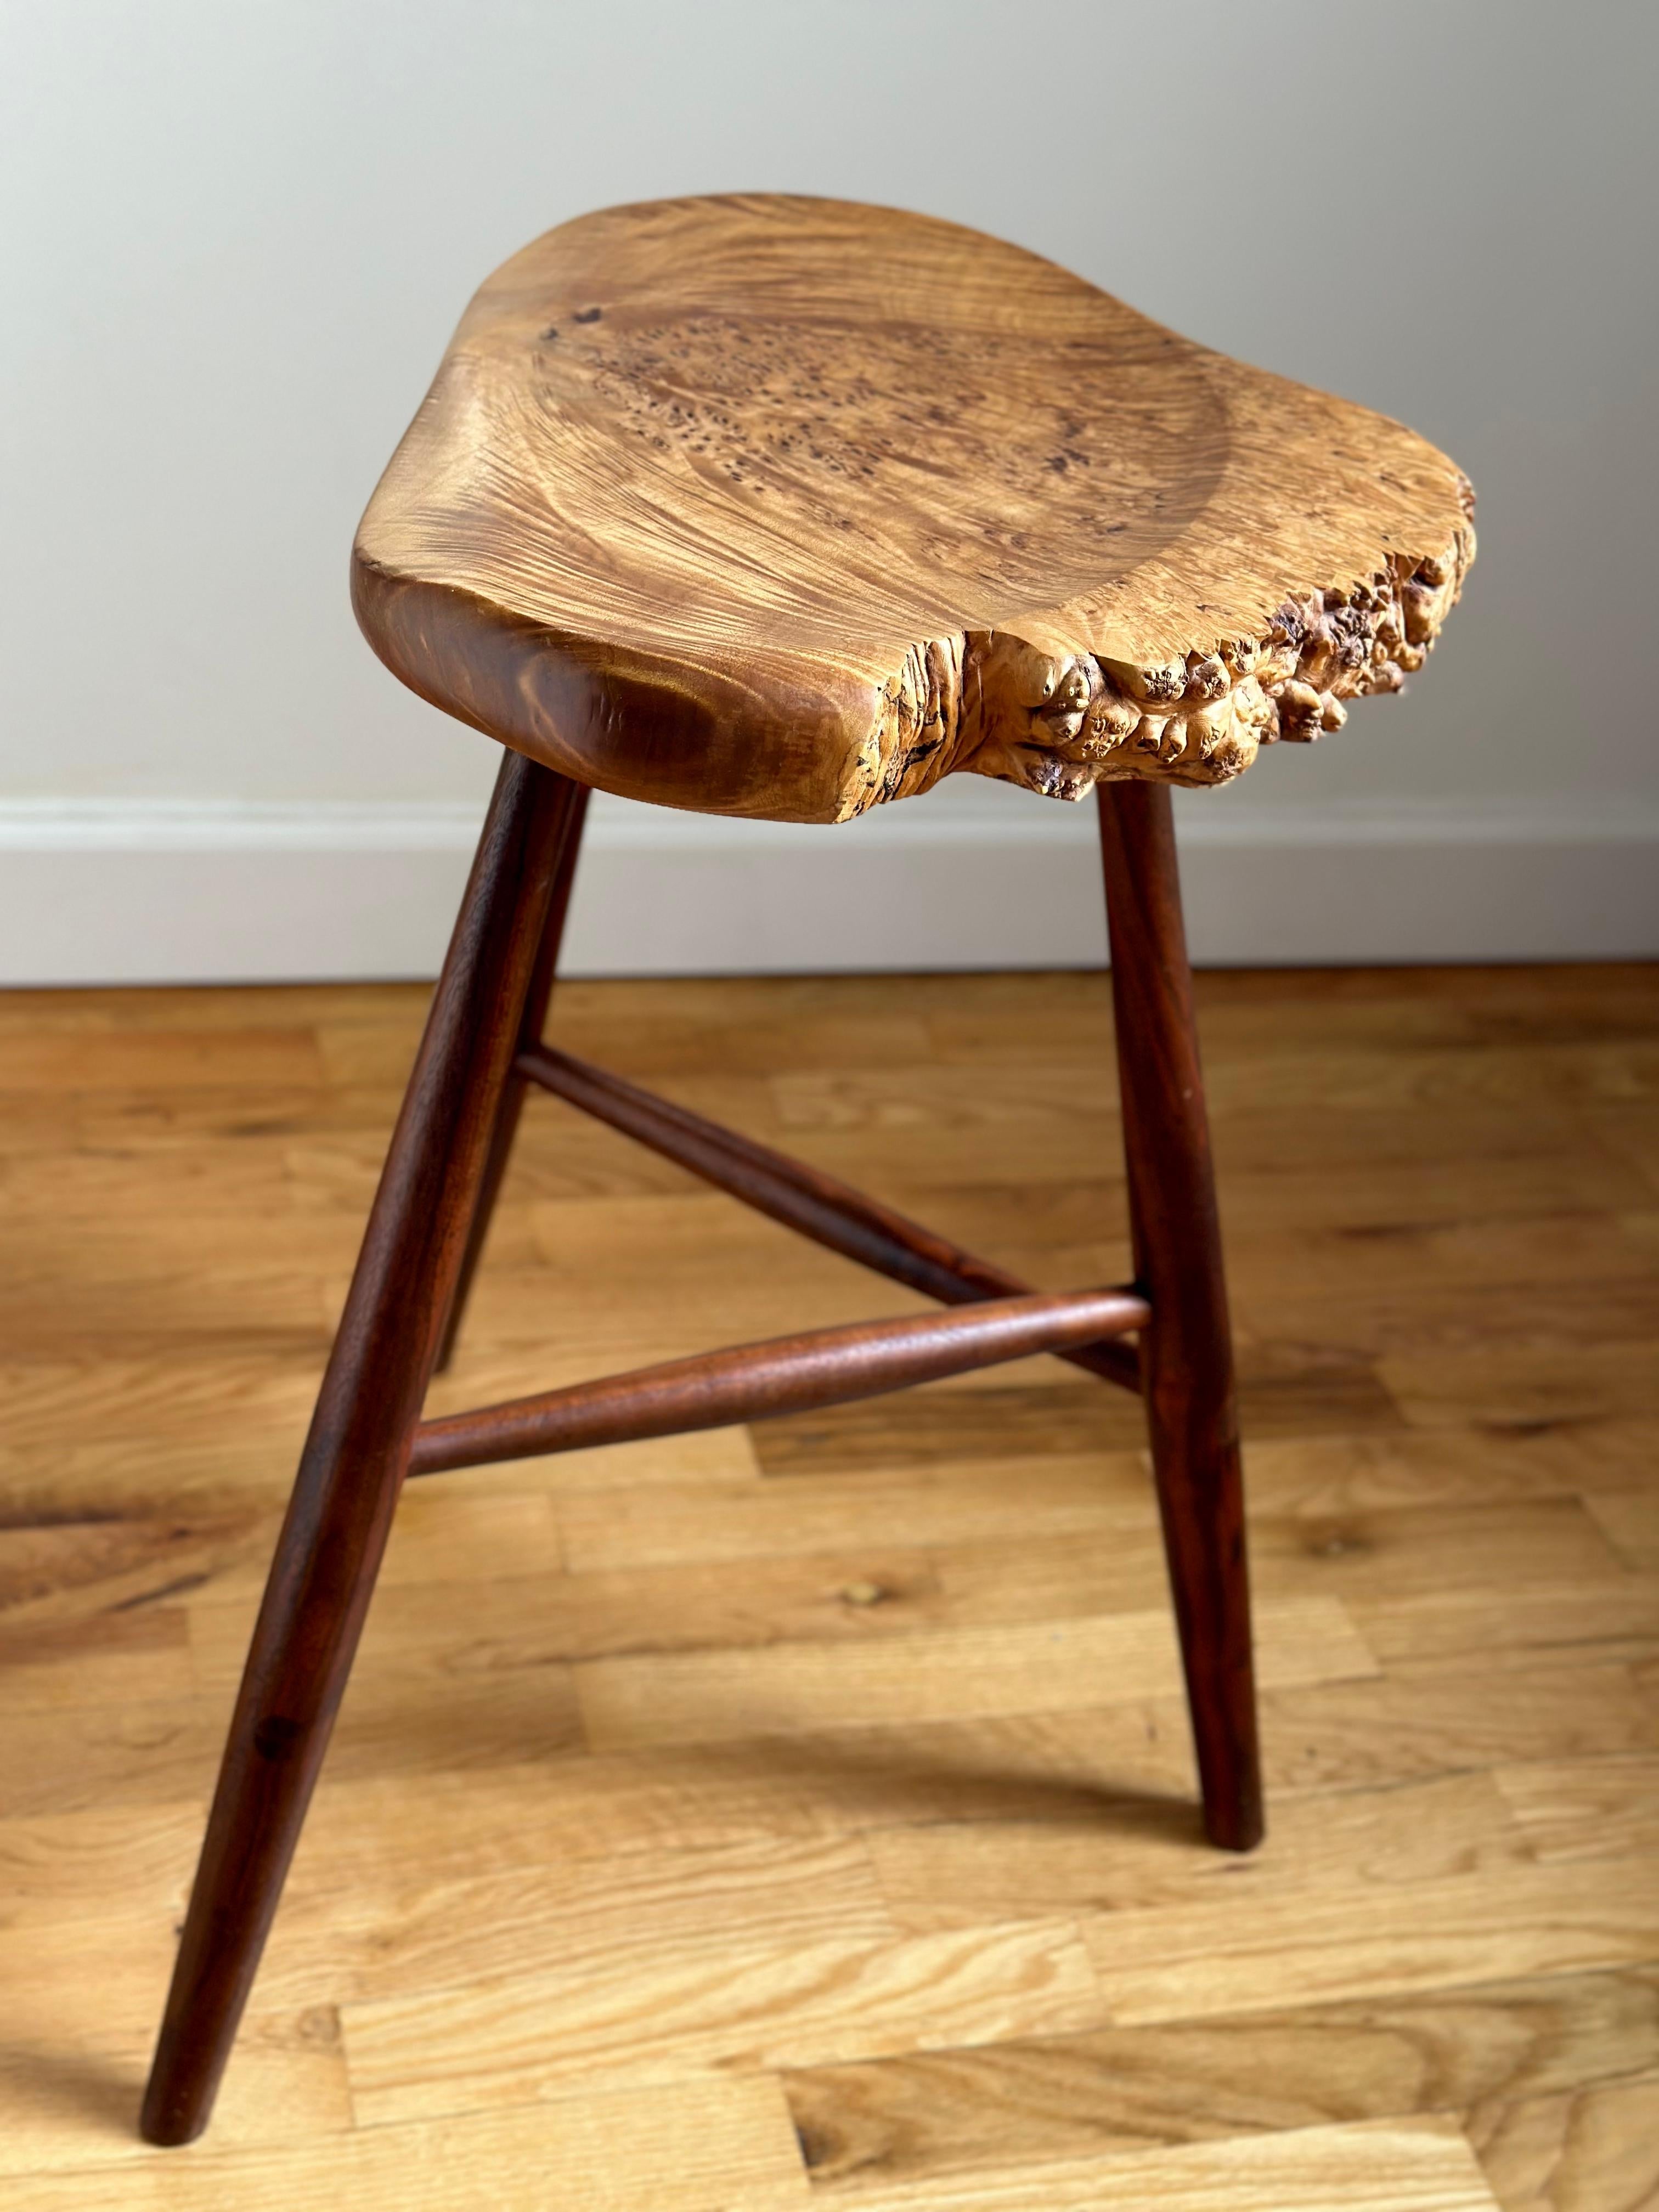 American Studio Live Edge Stool in Walnut and Maple Burl by Michael Elkan For Sale 2